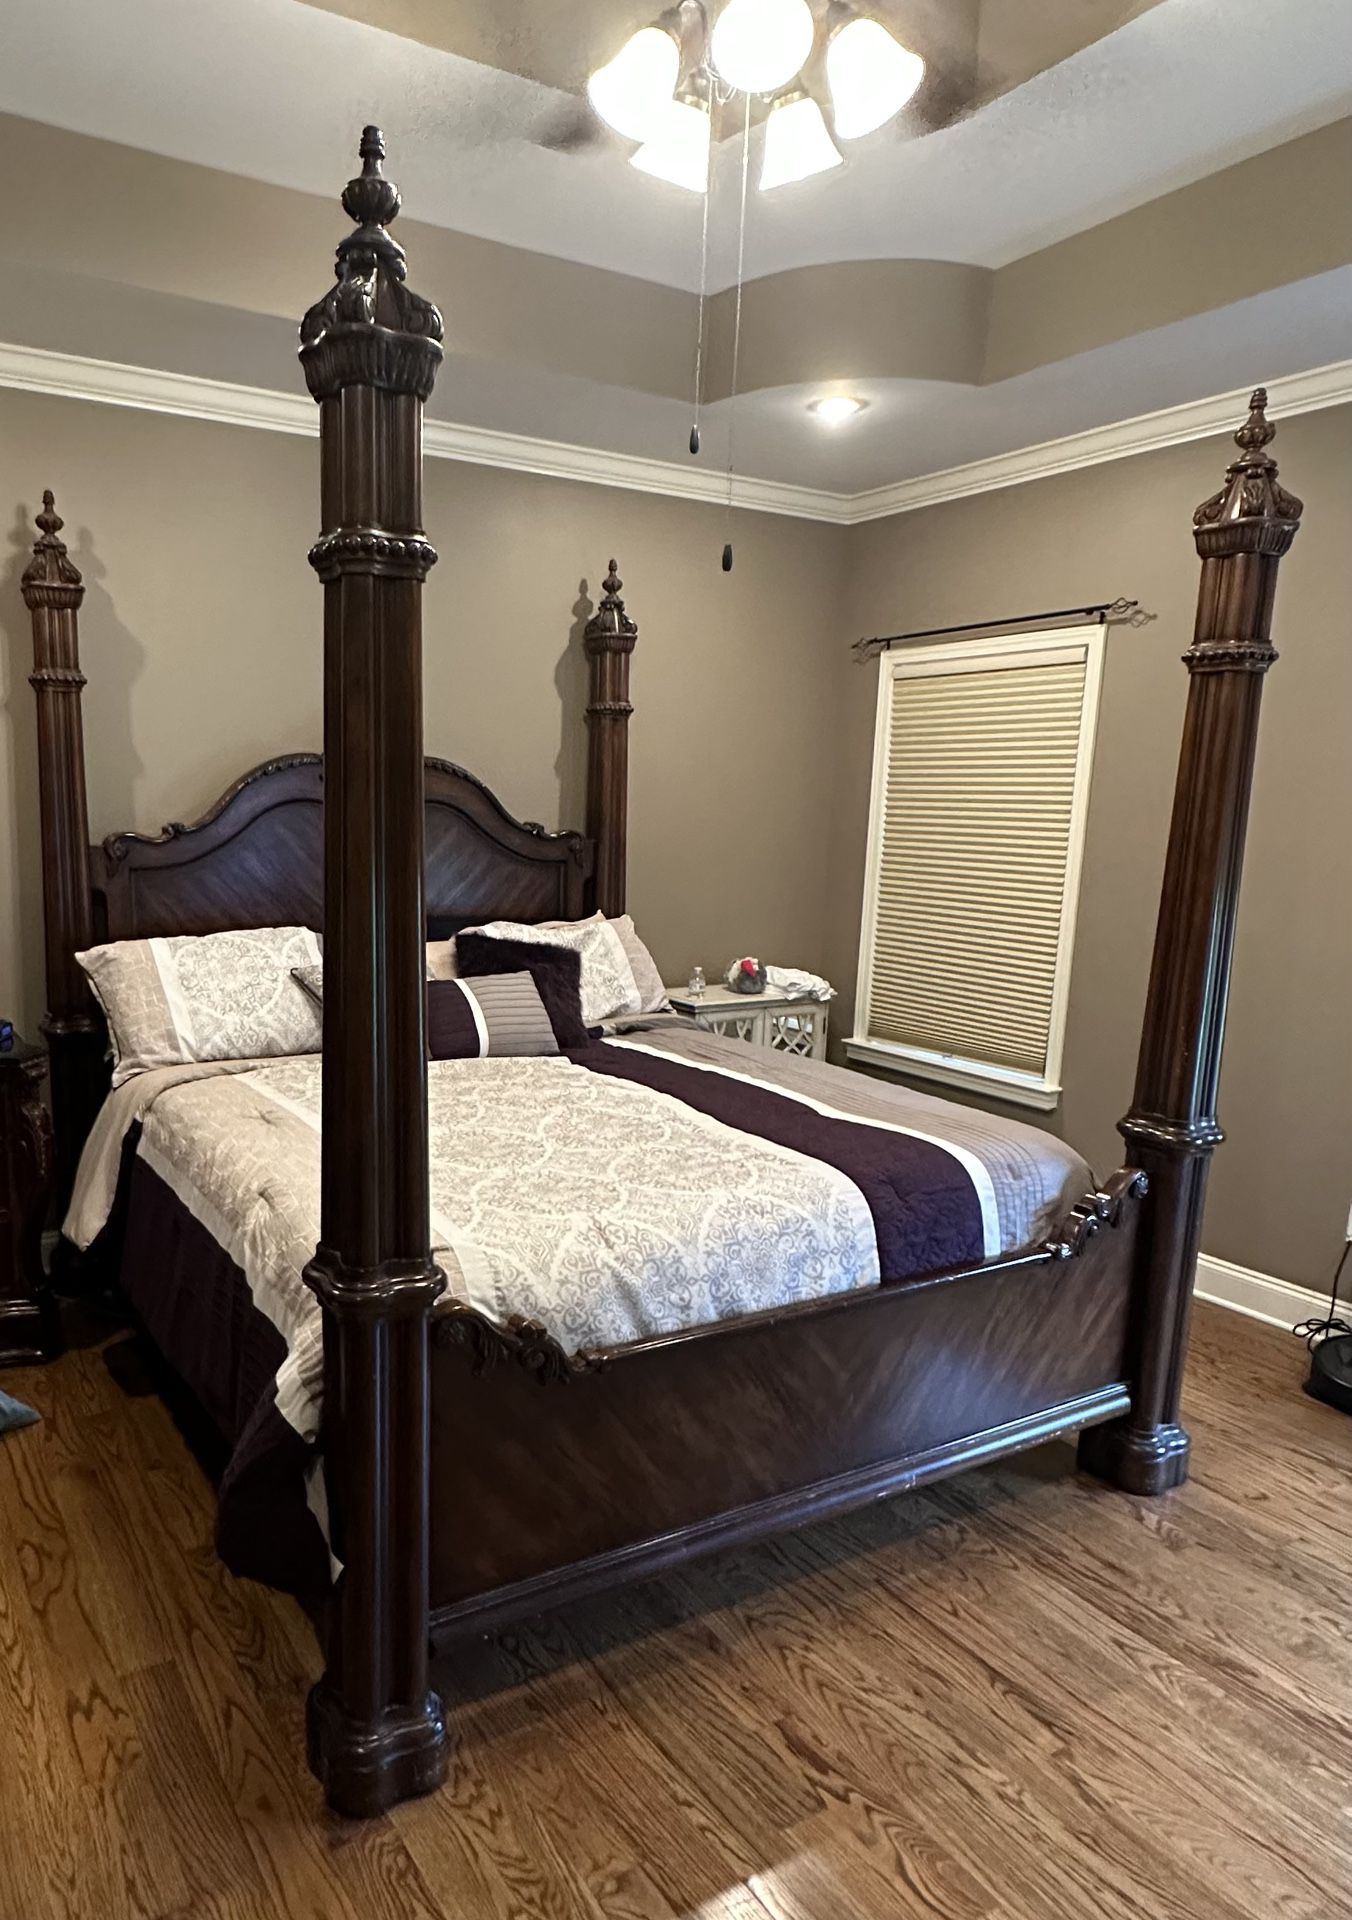 California King bed frame and matching side table